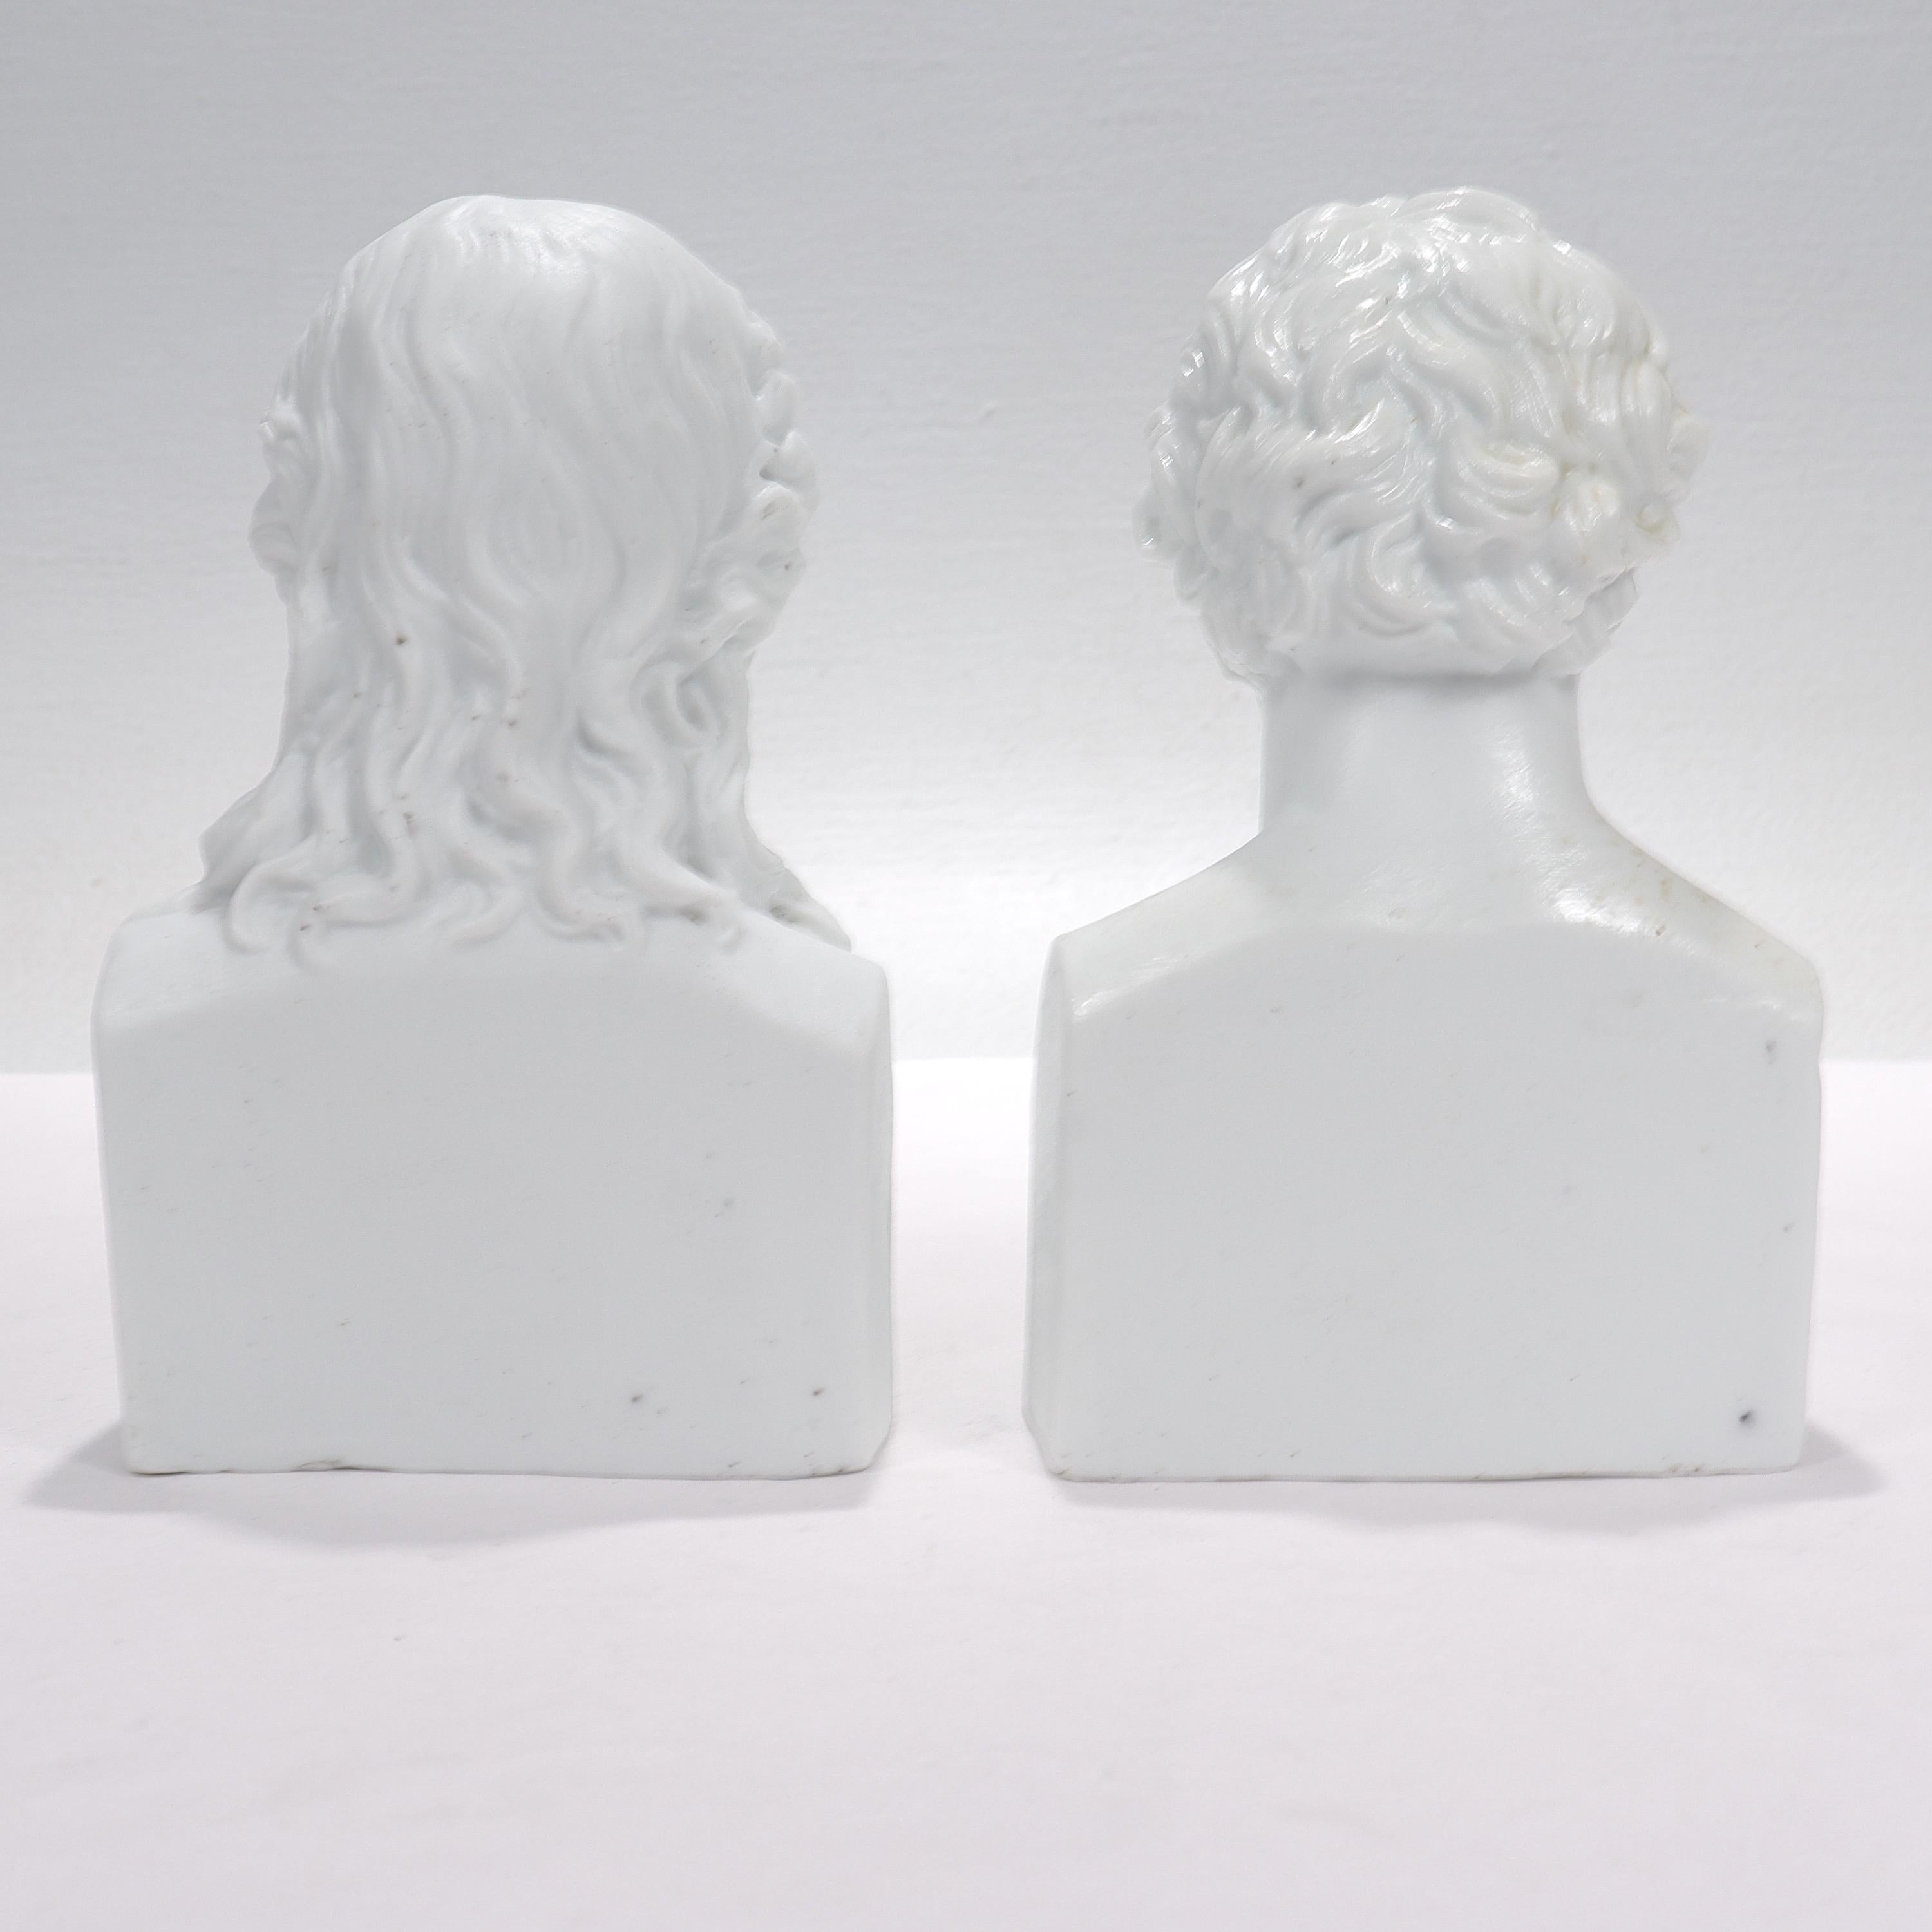 Antique Pair of Victorian Parian or Bisque Porcelain Busts of Schiller & Goethe  For Sale 1